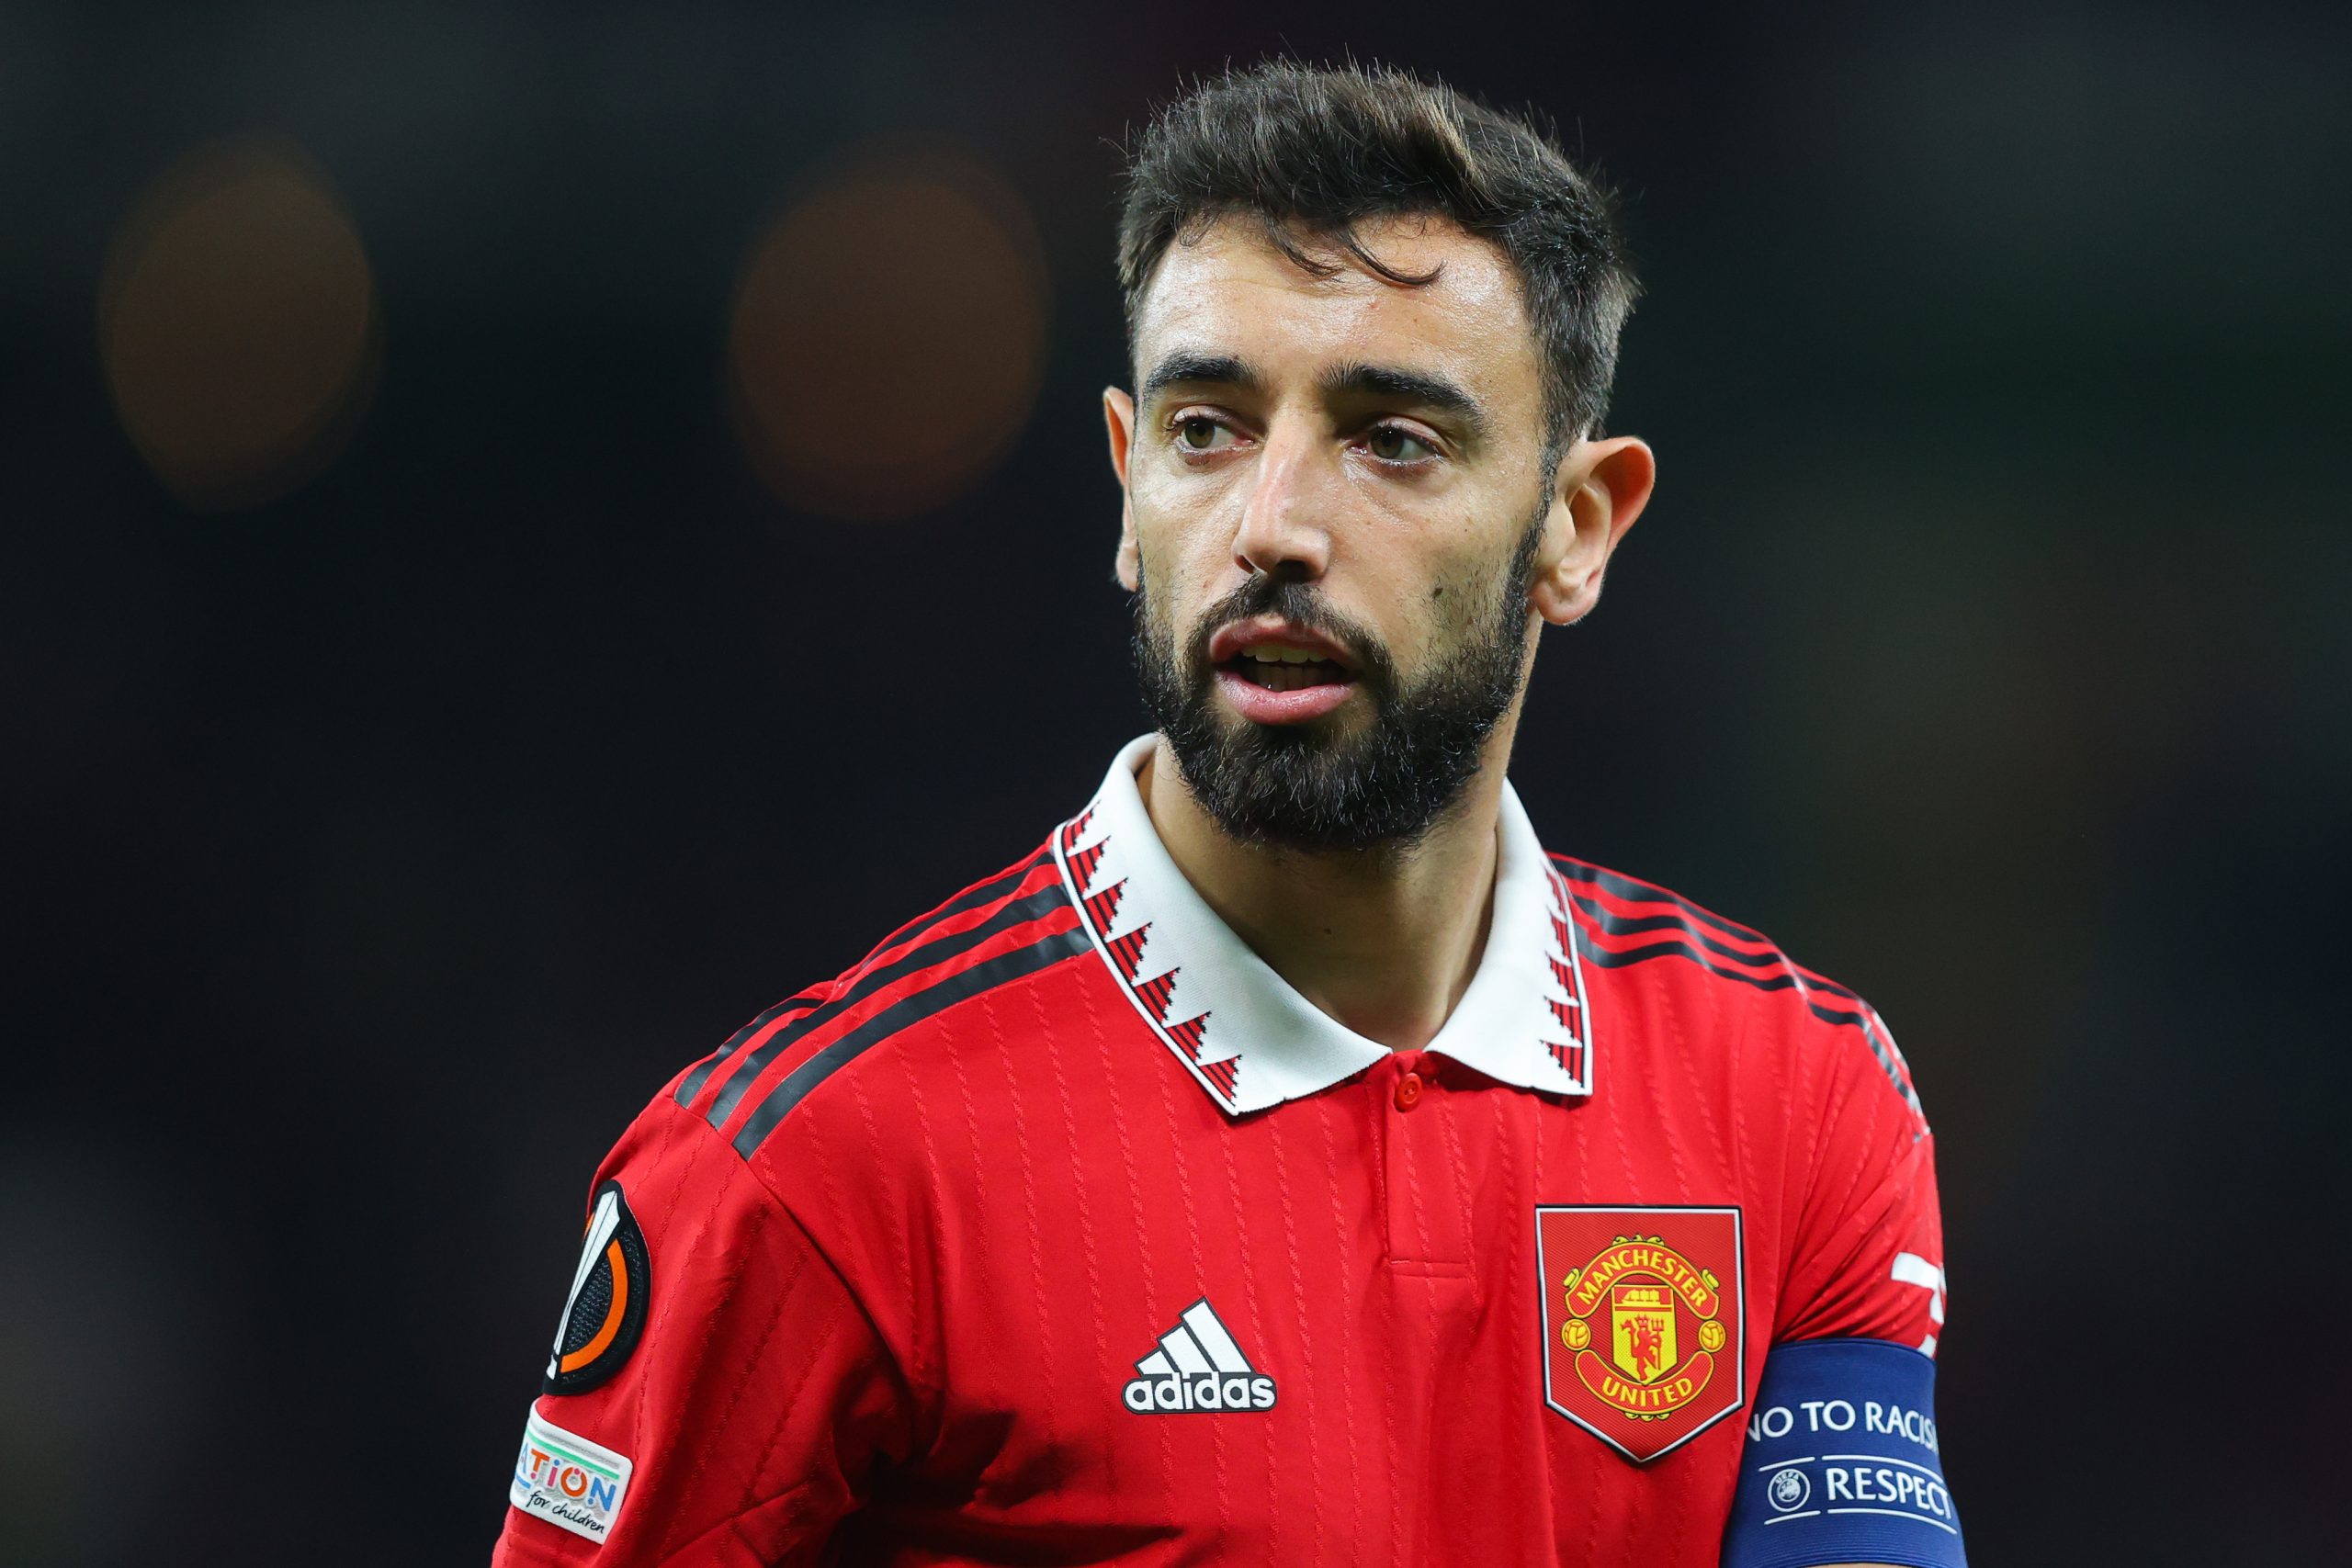  Bruno Fernandes to miss the game against Aston Villa next weekend due to suspension. (Photo by James Gill/Getty Images)